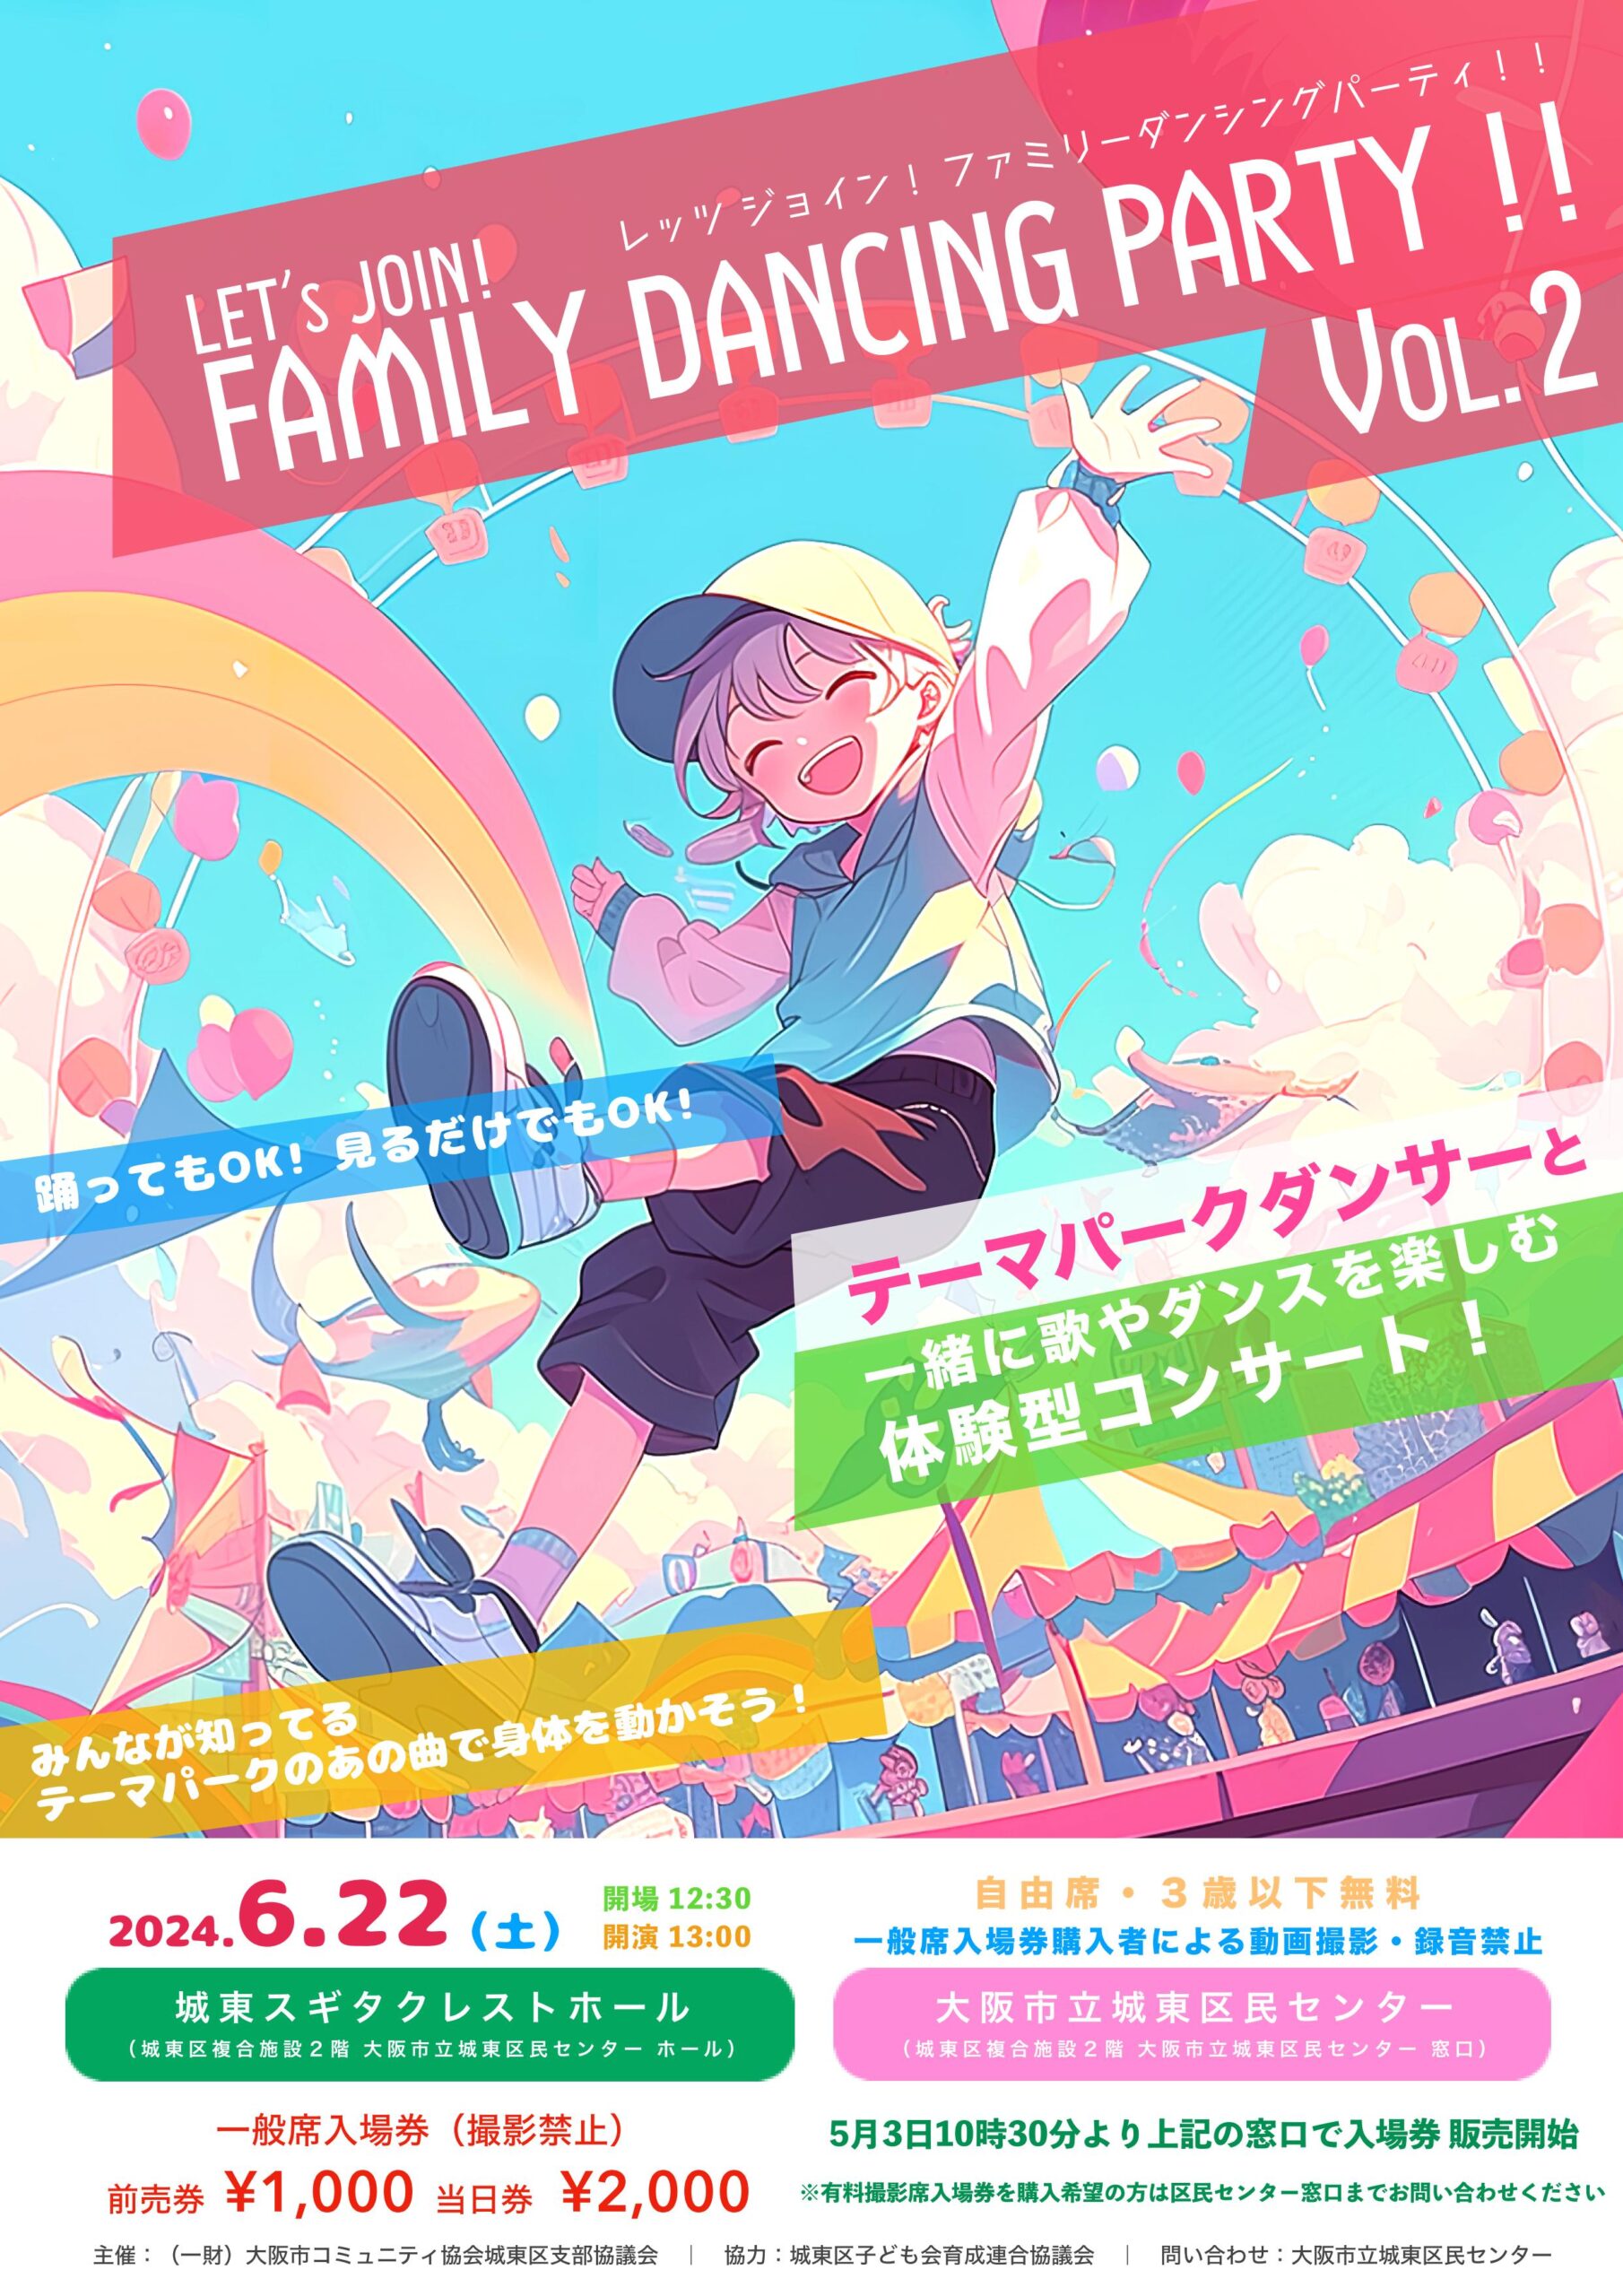 Let's Join ! Family Dancing party !! Vol.2